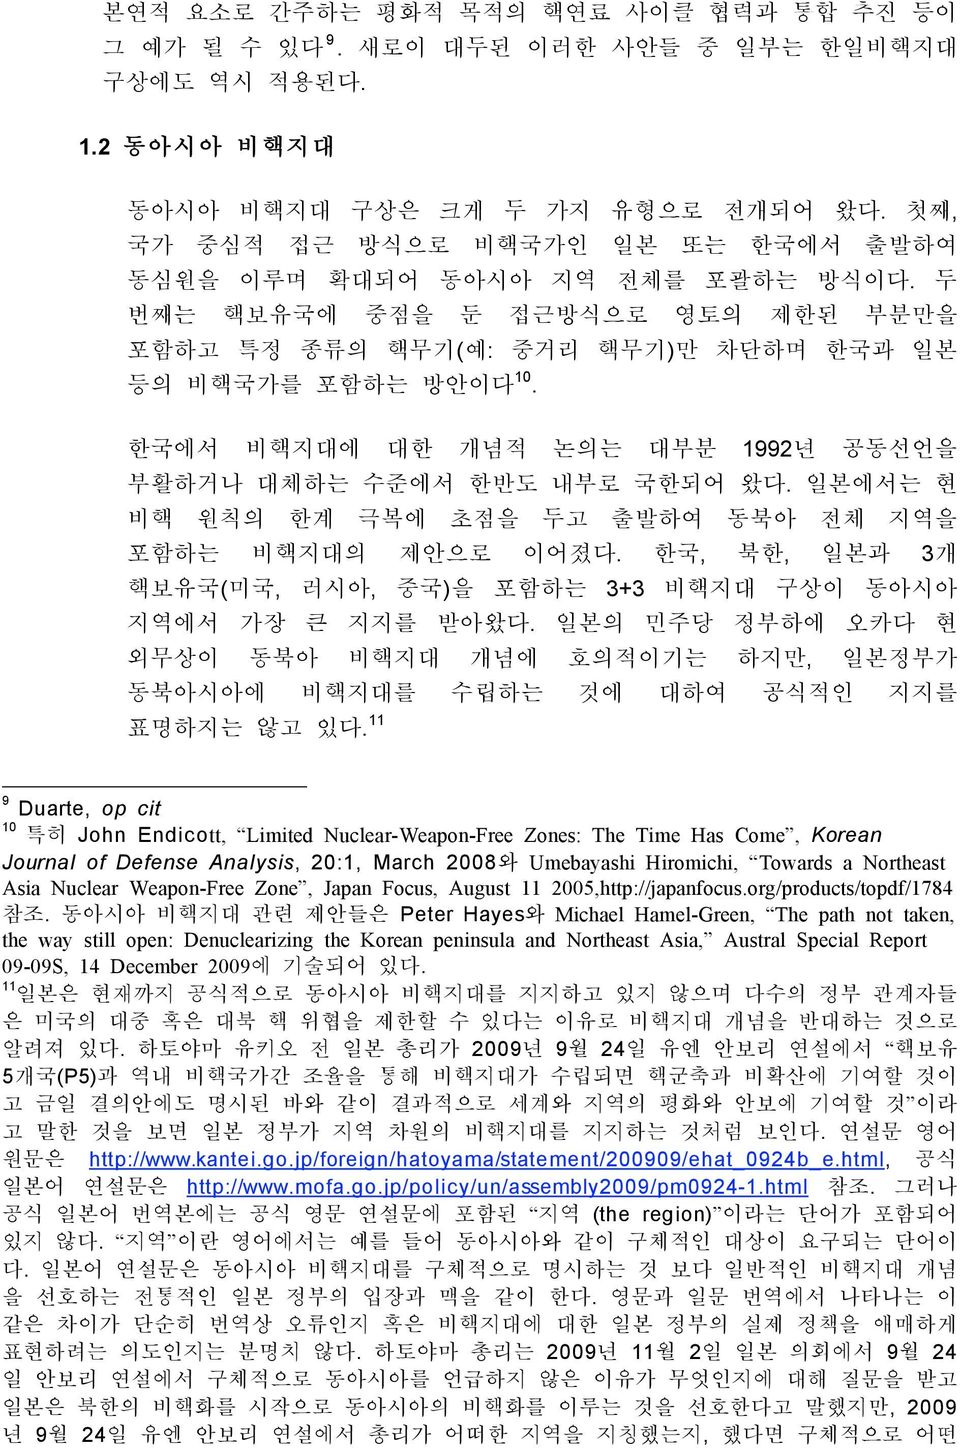 3 (,, ) 3+3.,. 11 9 Duarte, op cit 10 John Endicott, Limited Nuclear-Weapon-Free Zones: The Time Has Come, Korean Journal of Defense Analysis, 20:1, March 2008 Umebayashi